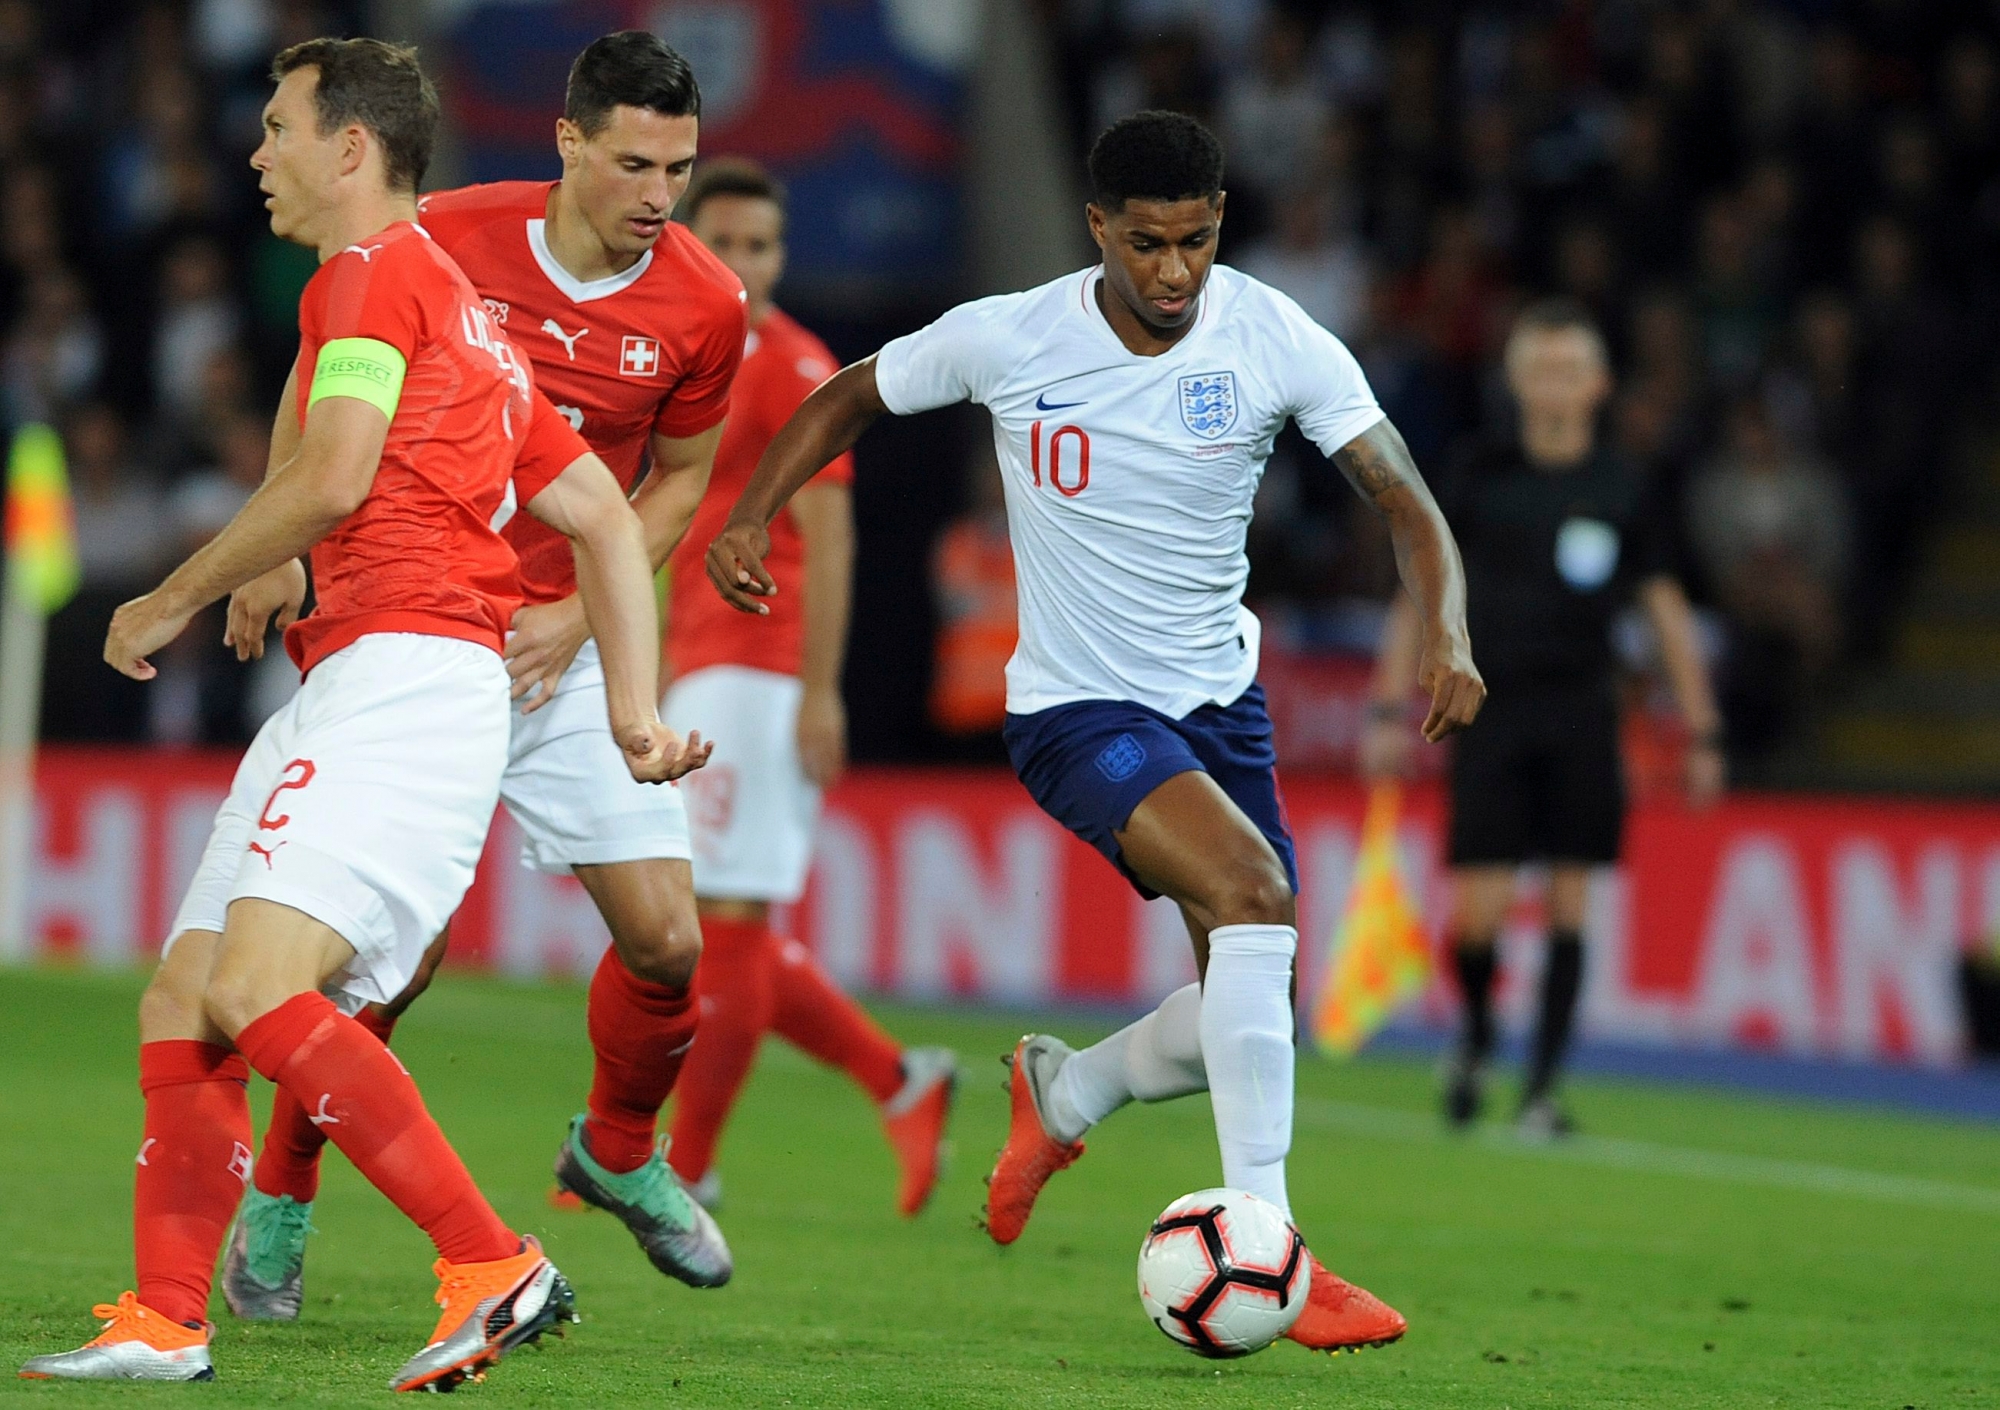 England's Marcus Rashford, right, goes with the ball during the International friendly soccer match between England and Switzerland at the King Power Stadium in Leicester, England, Tuesday, Sept. 11, 2018 . (AP Photo/ Rui Vieira) Britain England Switzerland Soccer